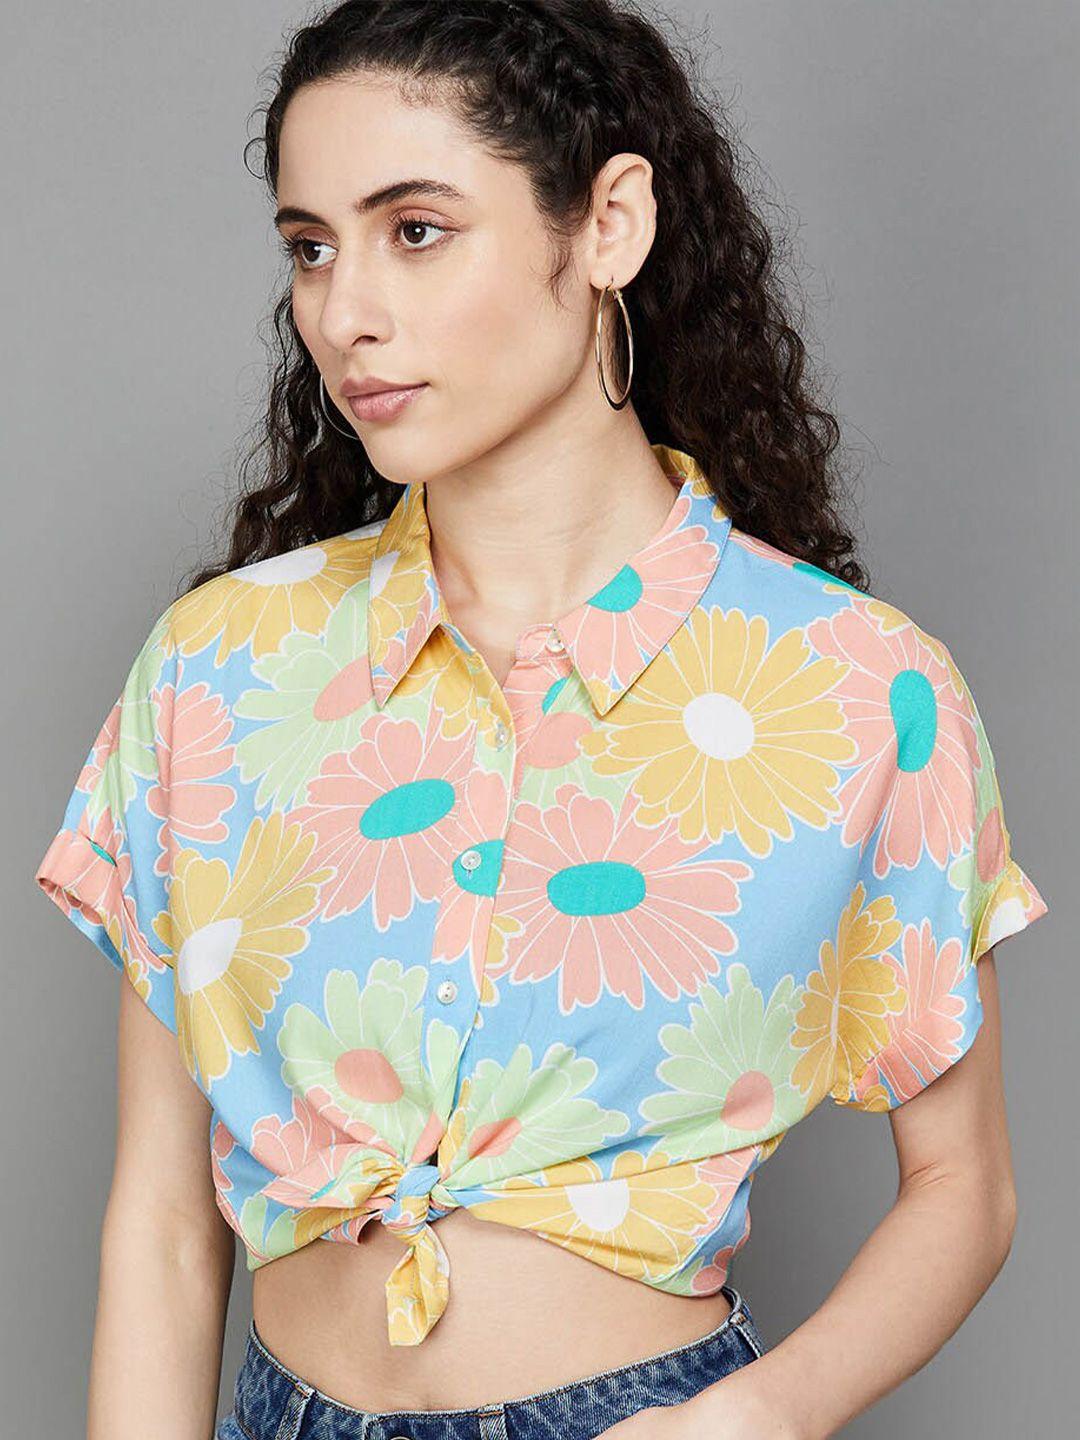 ginger-by-lifestyle-floral-printed-shirt-collar-extended-sleeves-shirt-style-top